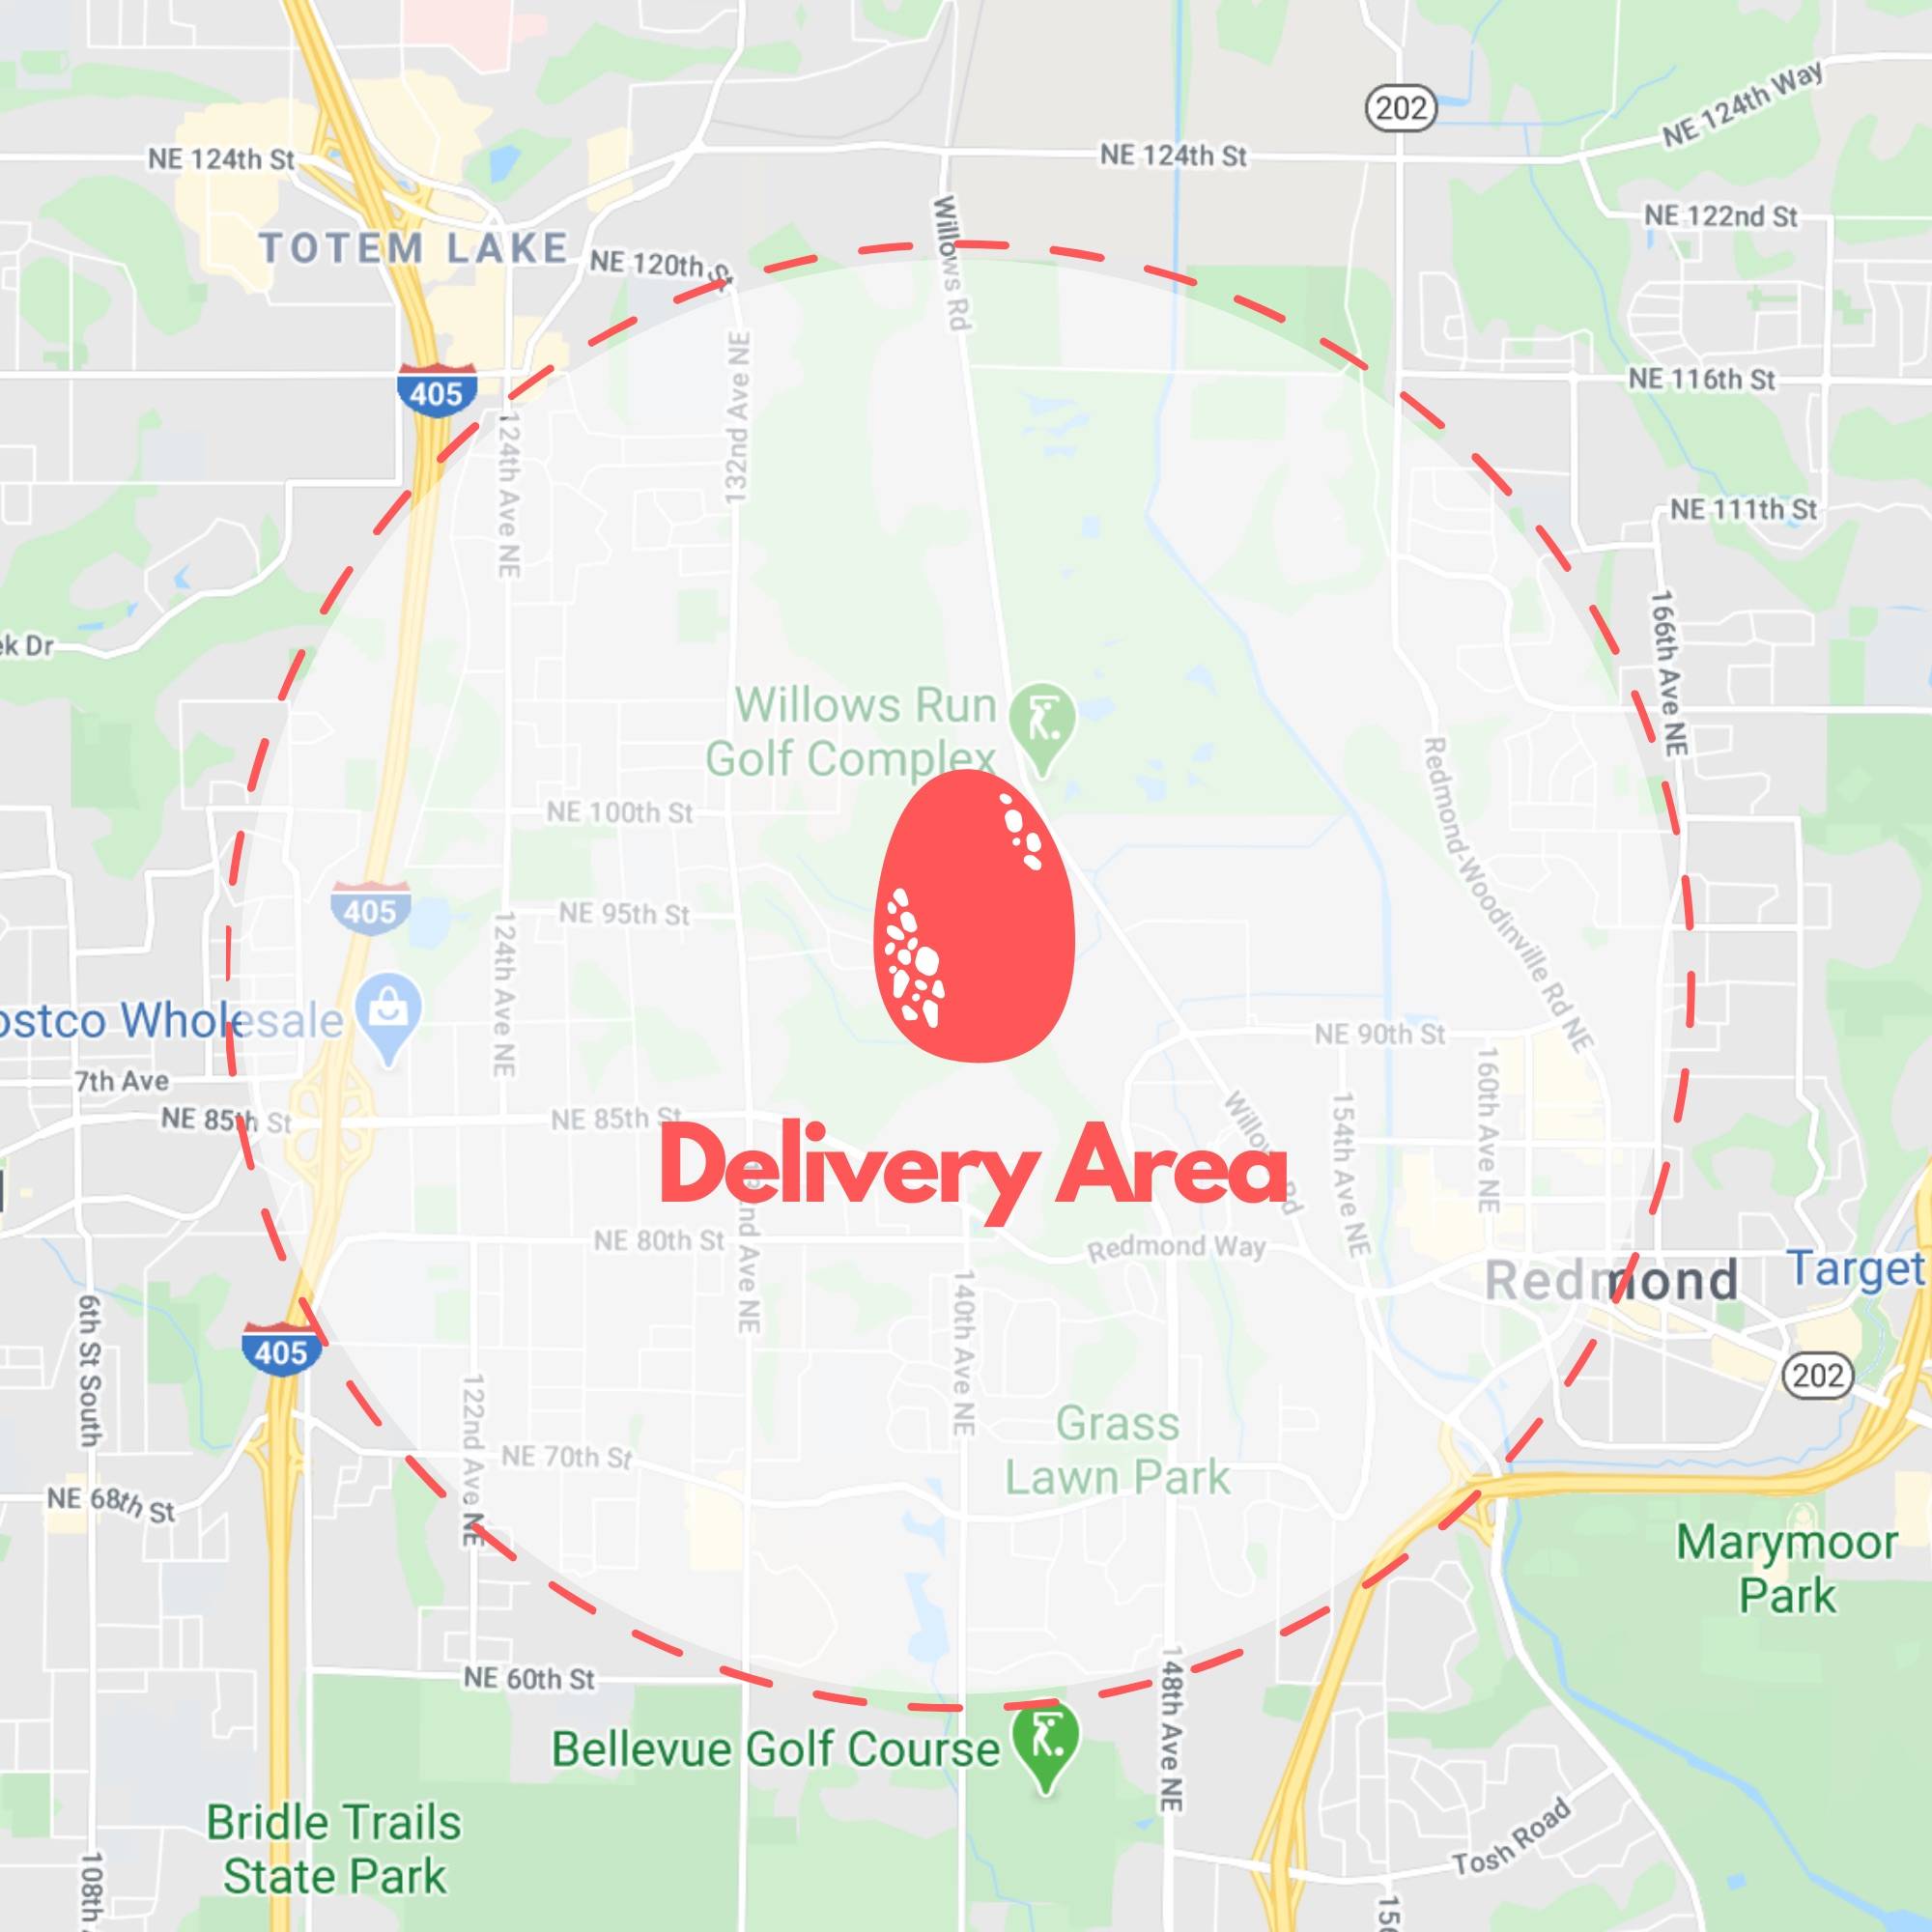 DigiPen Institute of Technology’s DragonDrop has a delivery radius of about two miles from the school’s campus. Image courtesy of DigiPen Institute of Technology